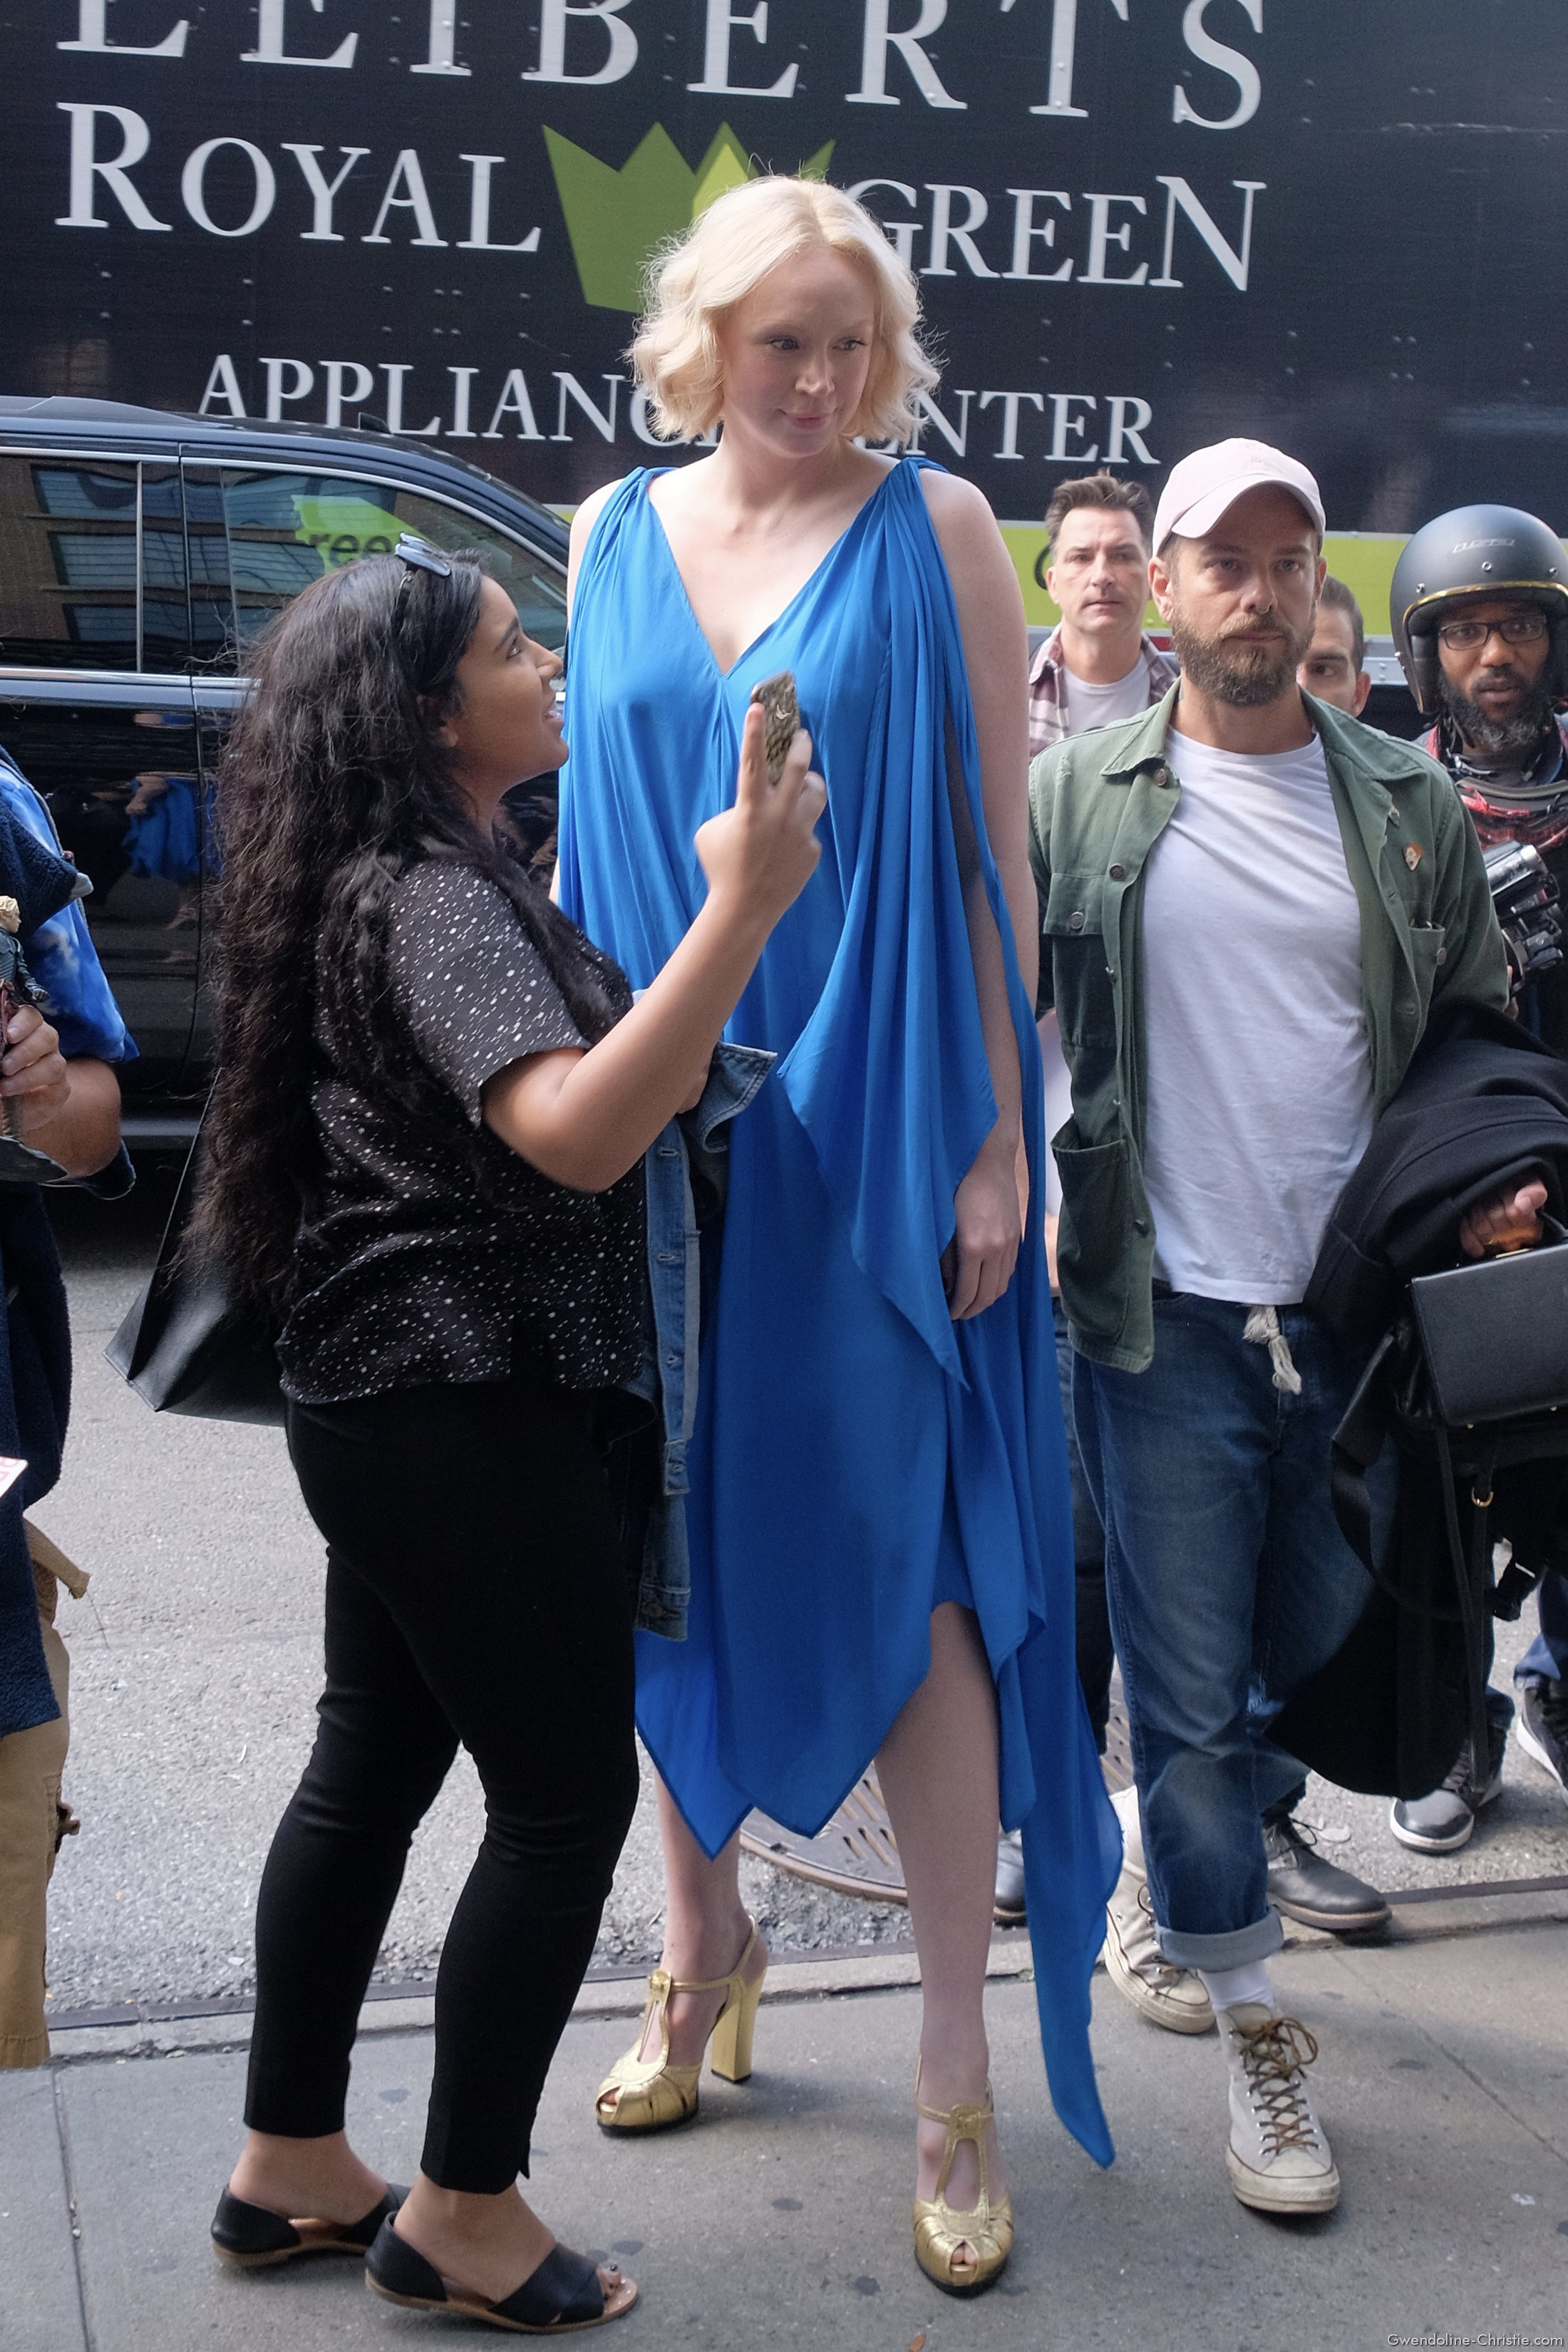 How tall is gwendoline christie in feet